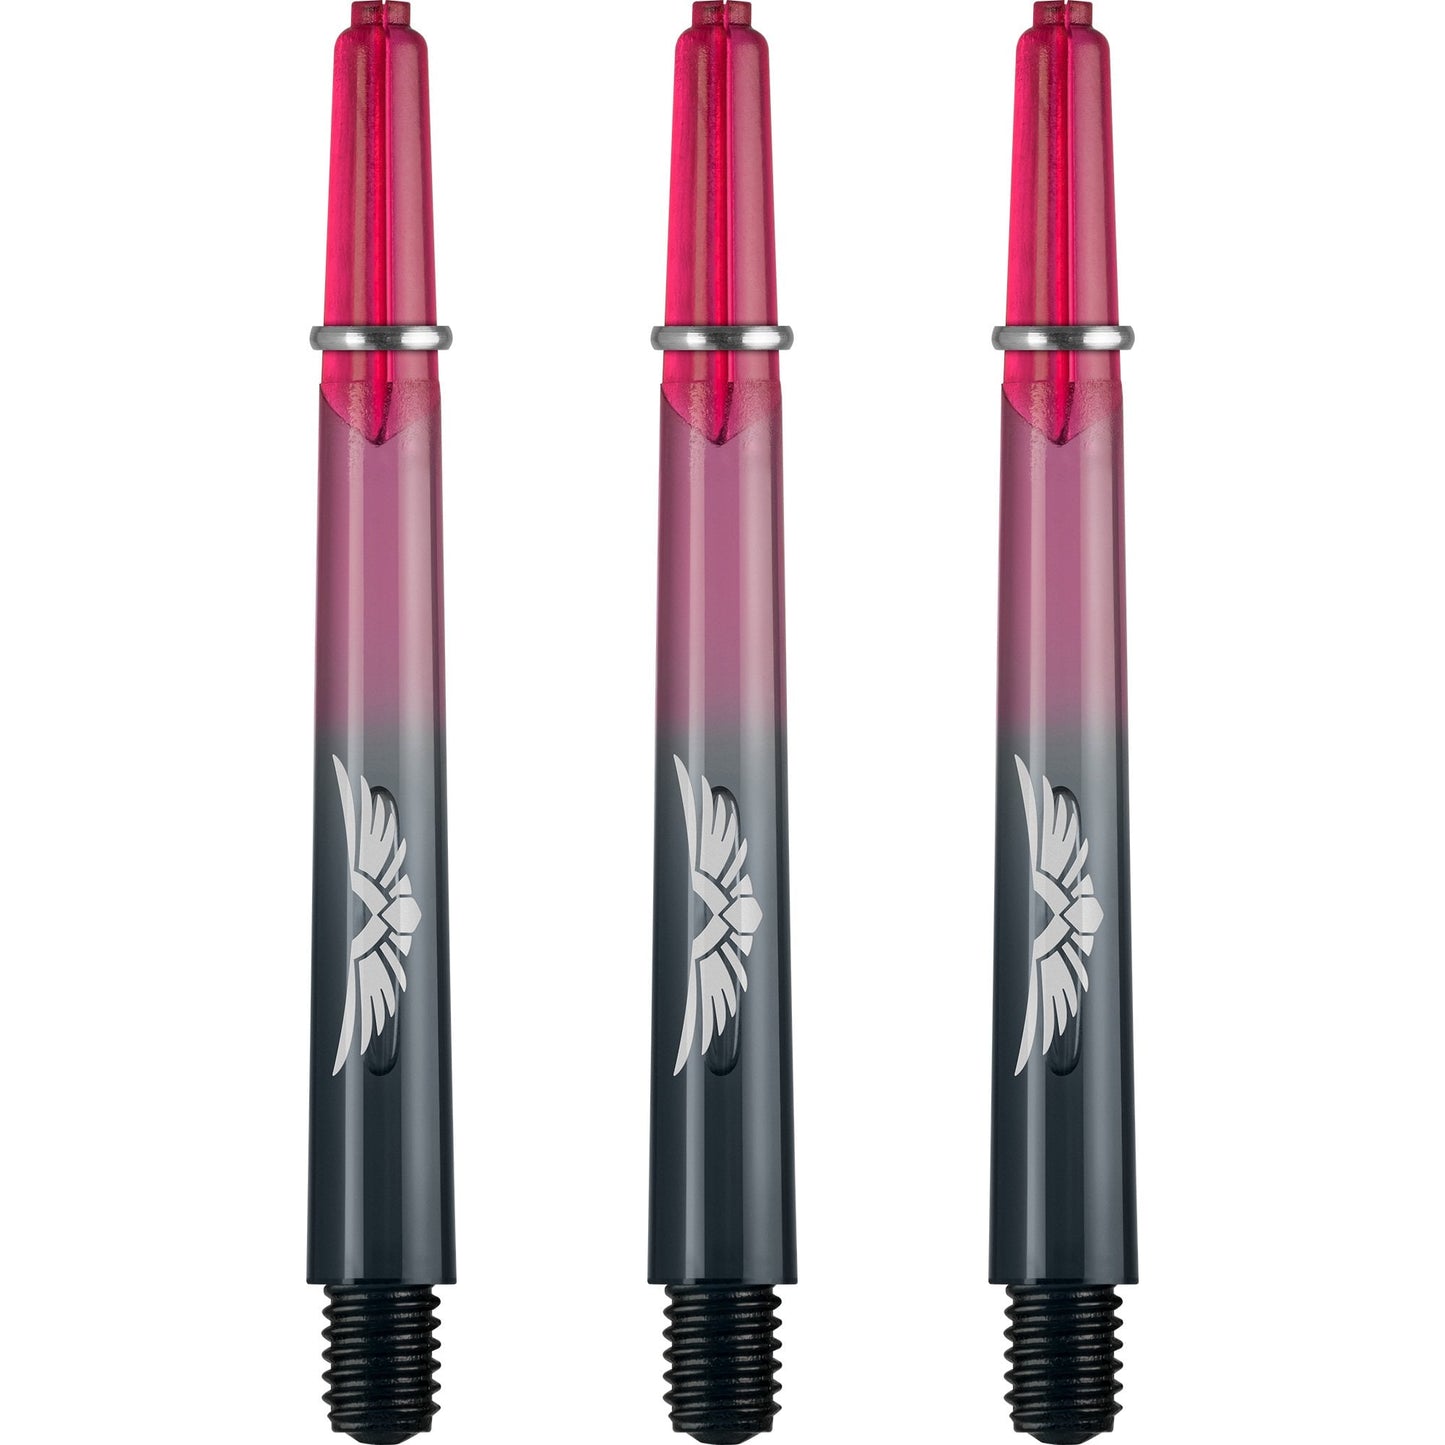 Shot Eagle Claw Dart Shafts - with Machined Rings - Strong Polycarbonate Stems - Black Red Medium